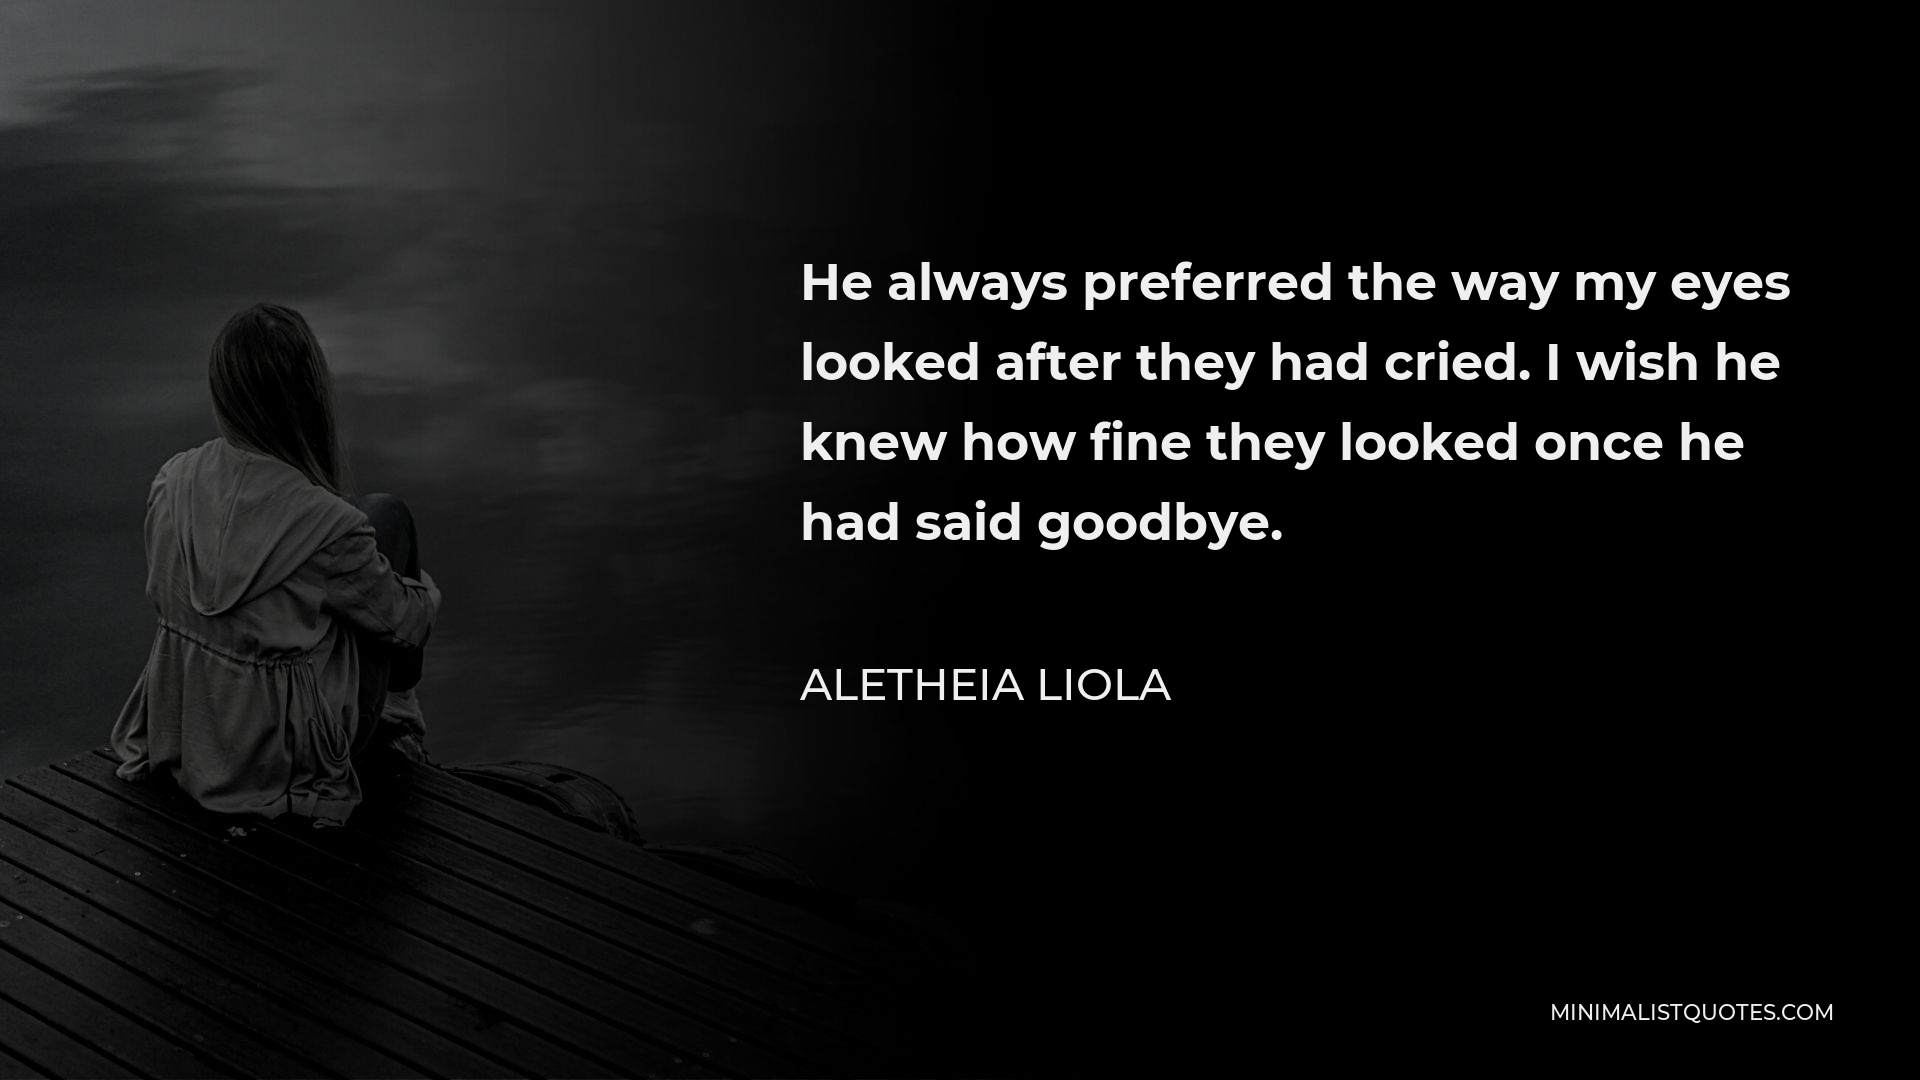 Aletheia Liola Quote - He always preferred the way my eyes looked after they had cried. I wish he knew how fine they looked once he had said goodbye.